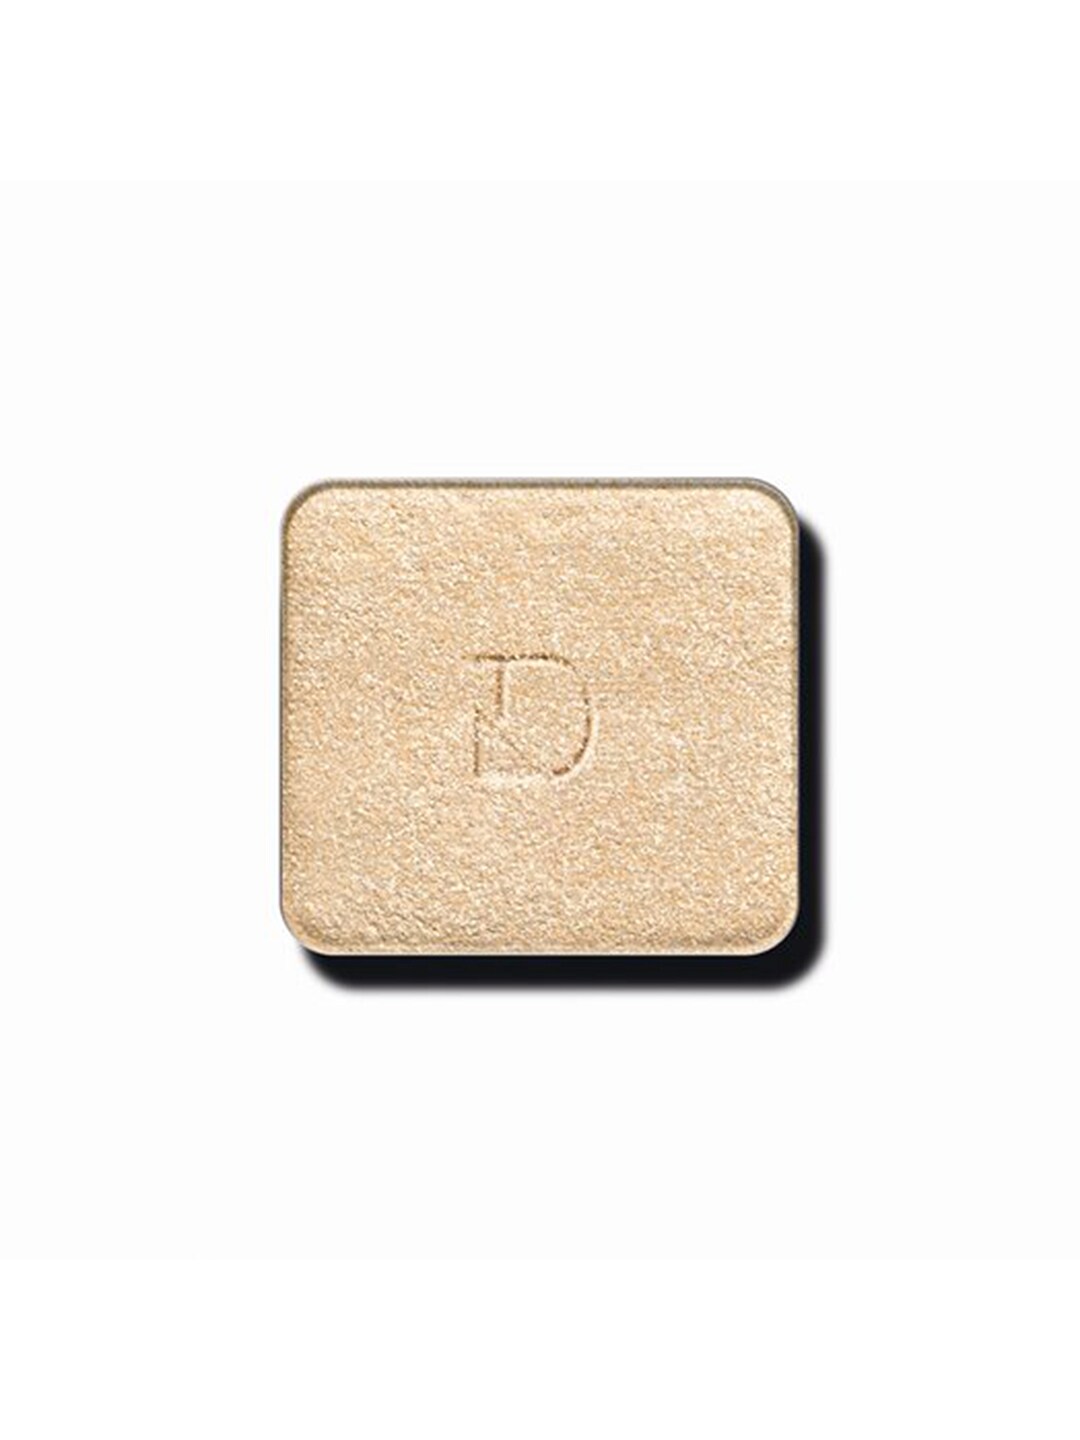 Diego dalla Palma MILANO Fine Texture Pearly Eyeshadow - Light Champagne 117 Price in India